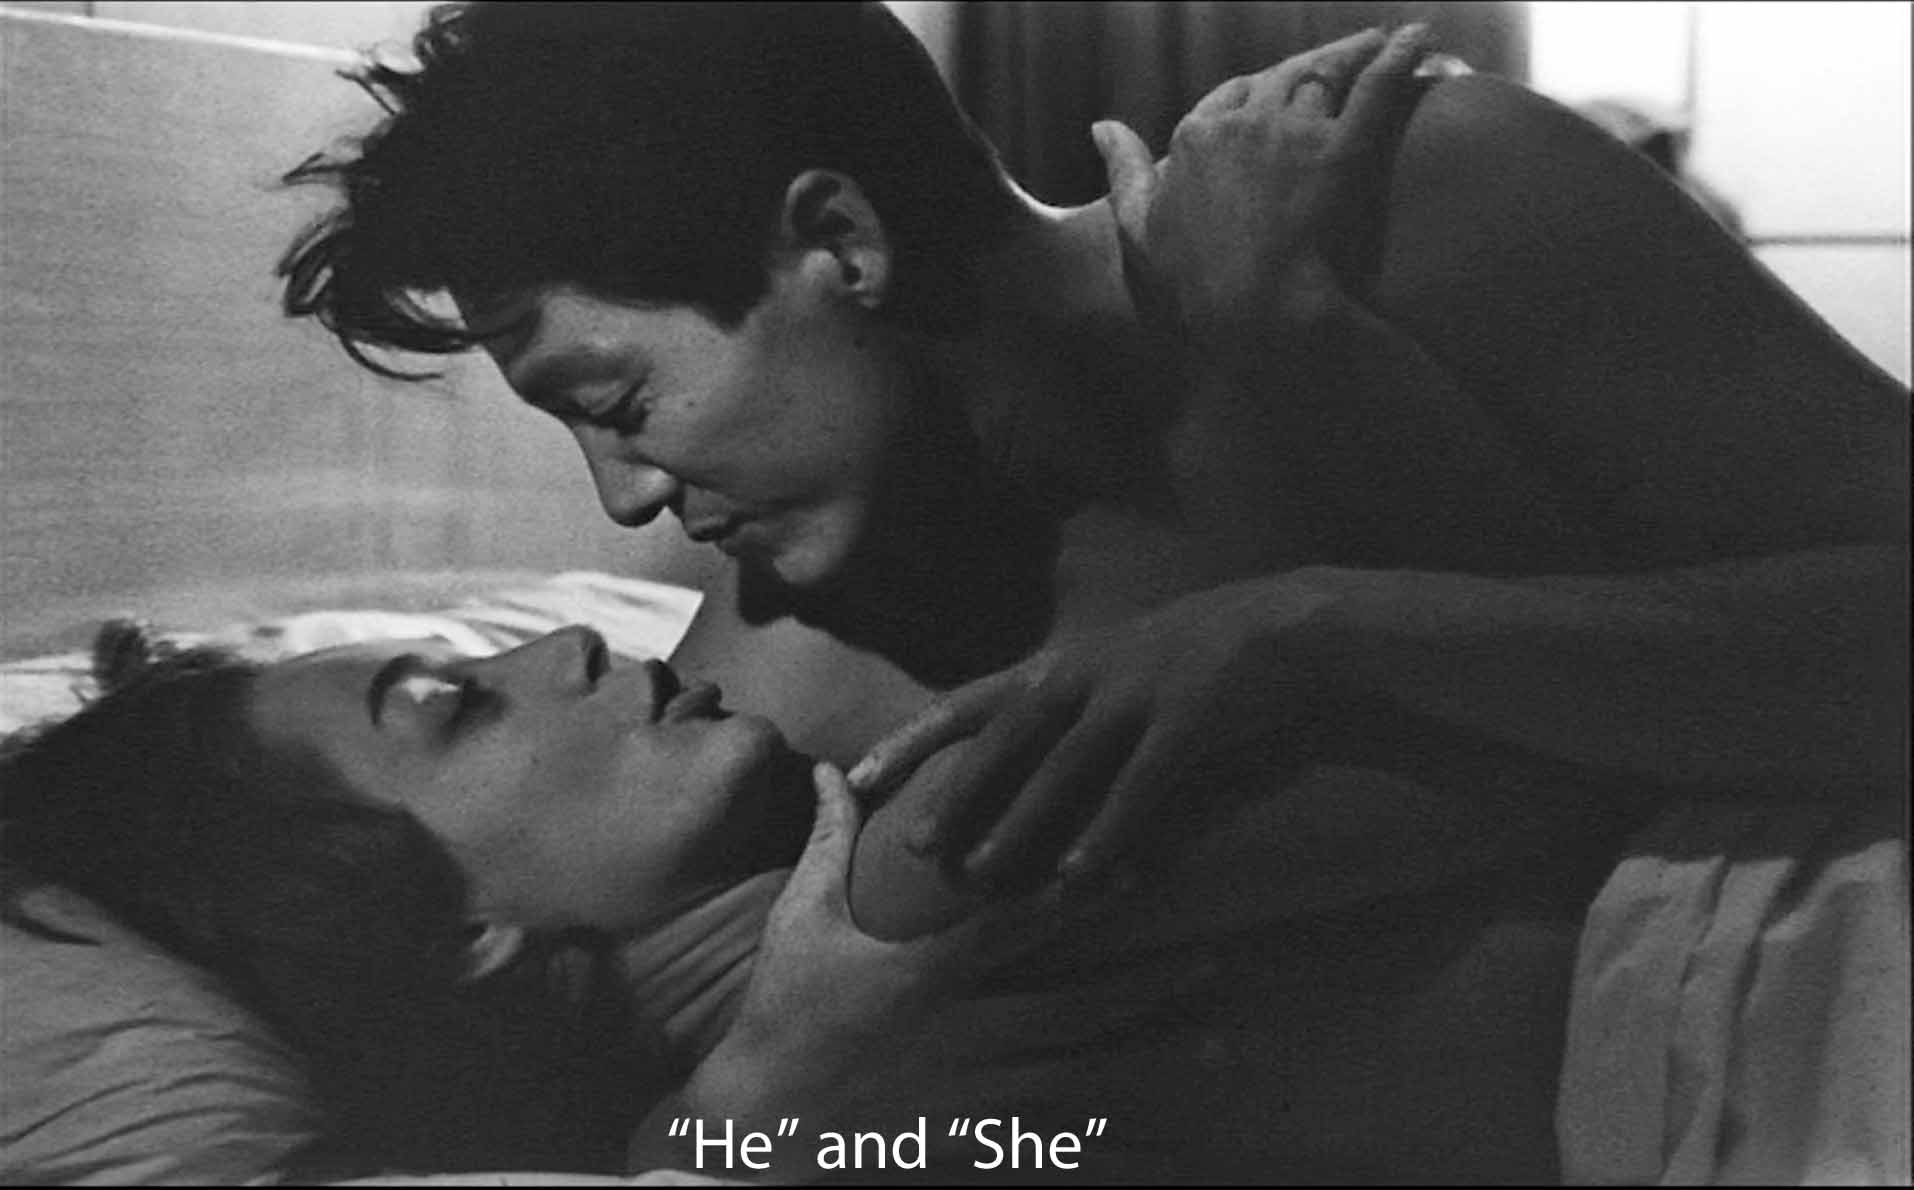 He and She